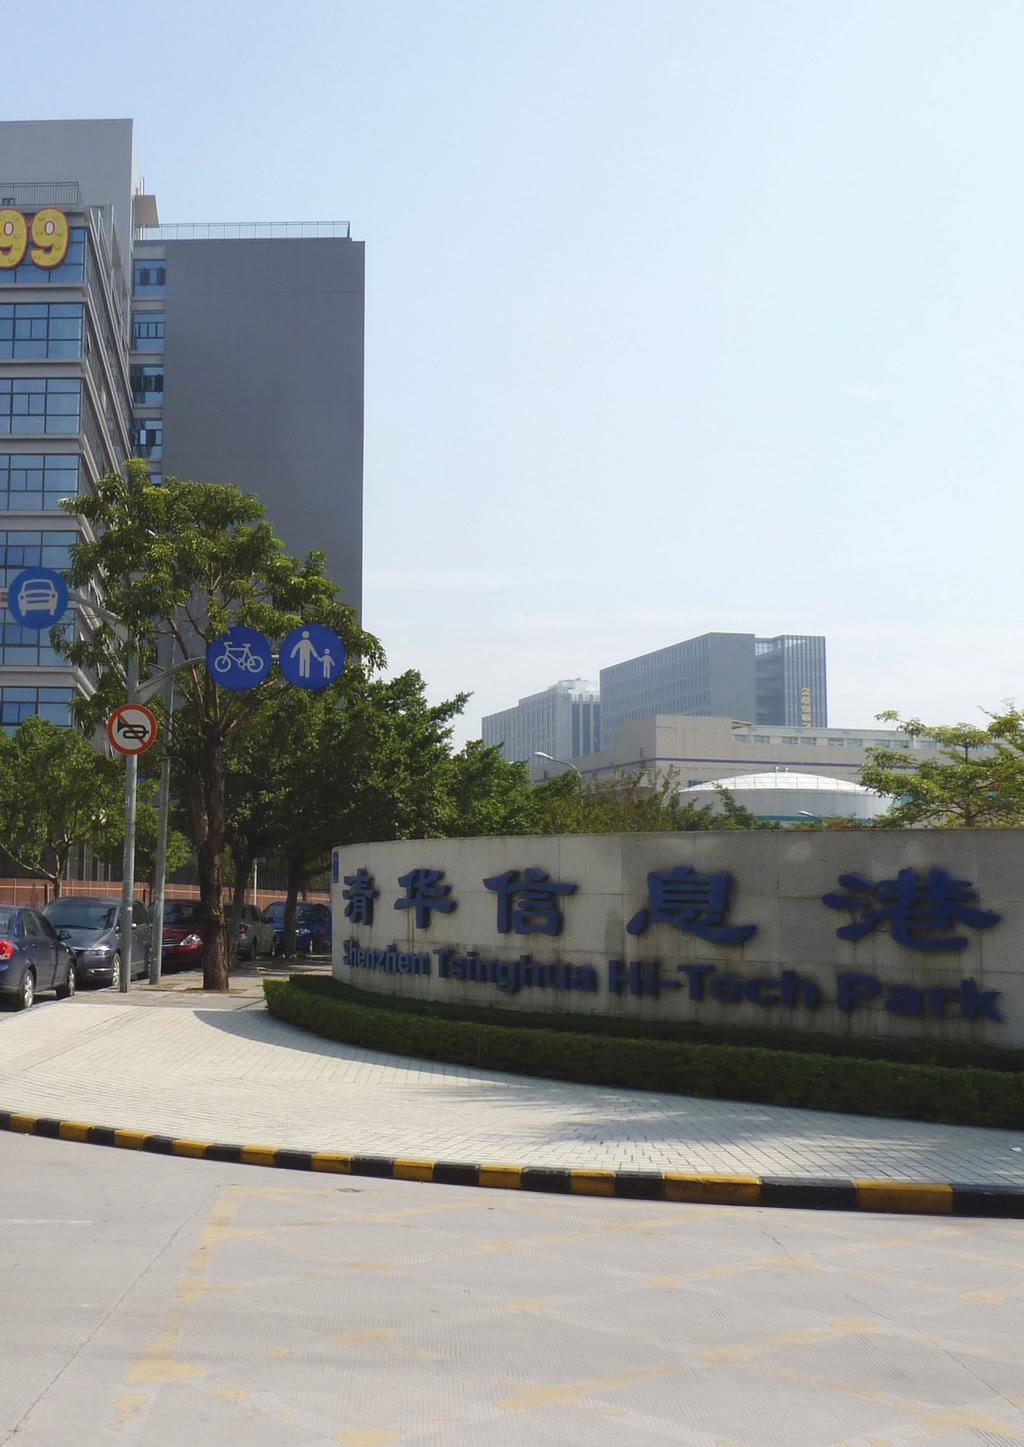 Tenow is in the process of setting up new offices on the second floor in this new office complex in Shenzhen s High- Tech Park. These offices will give Tenow room to expand.